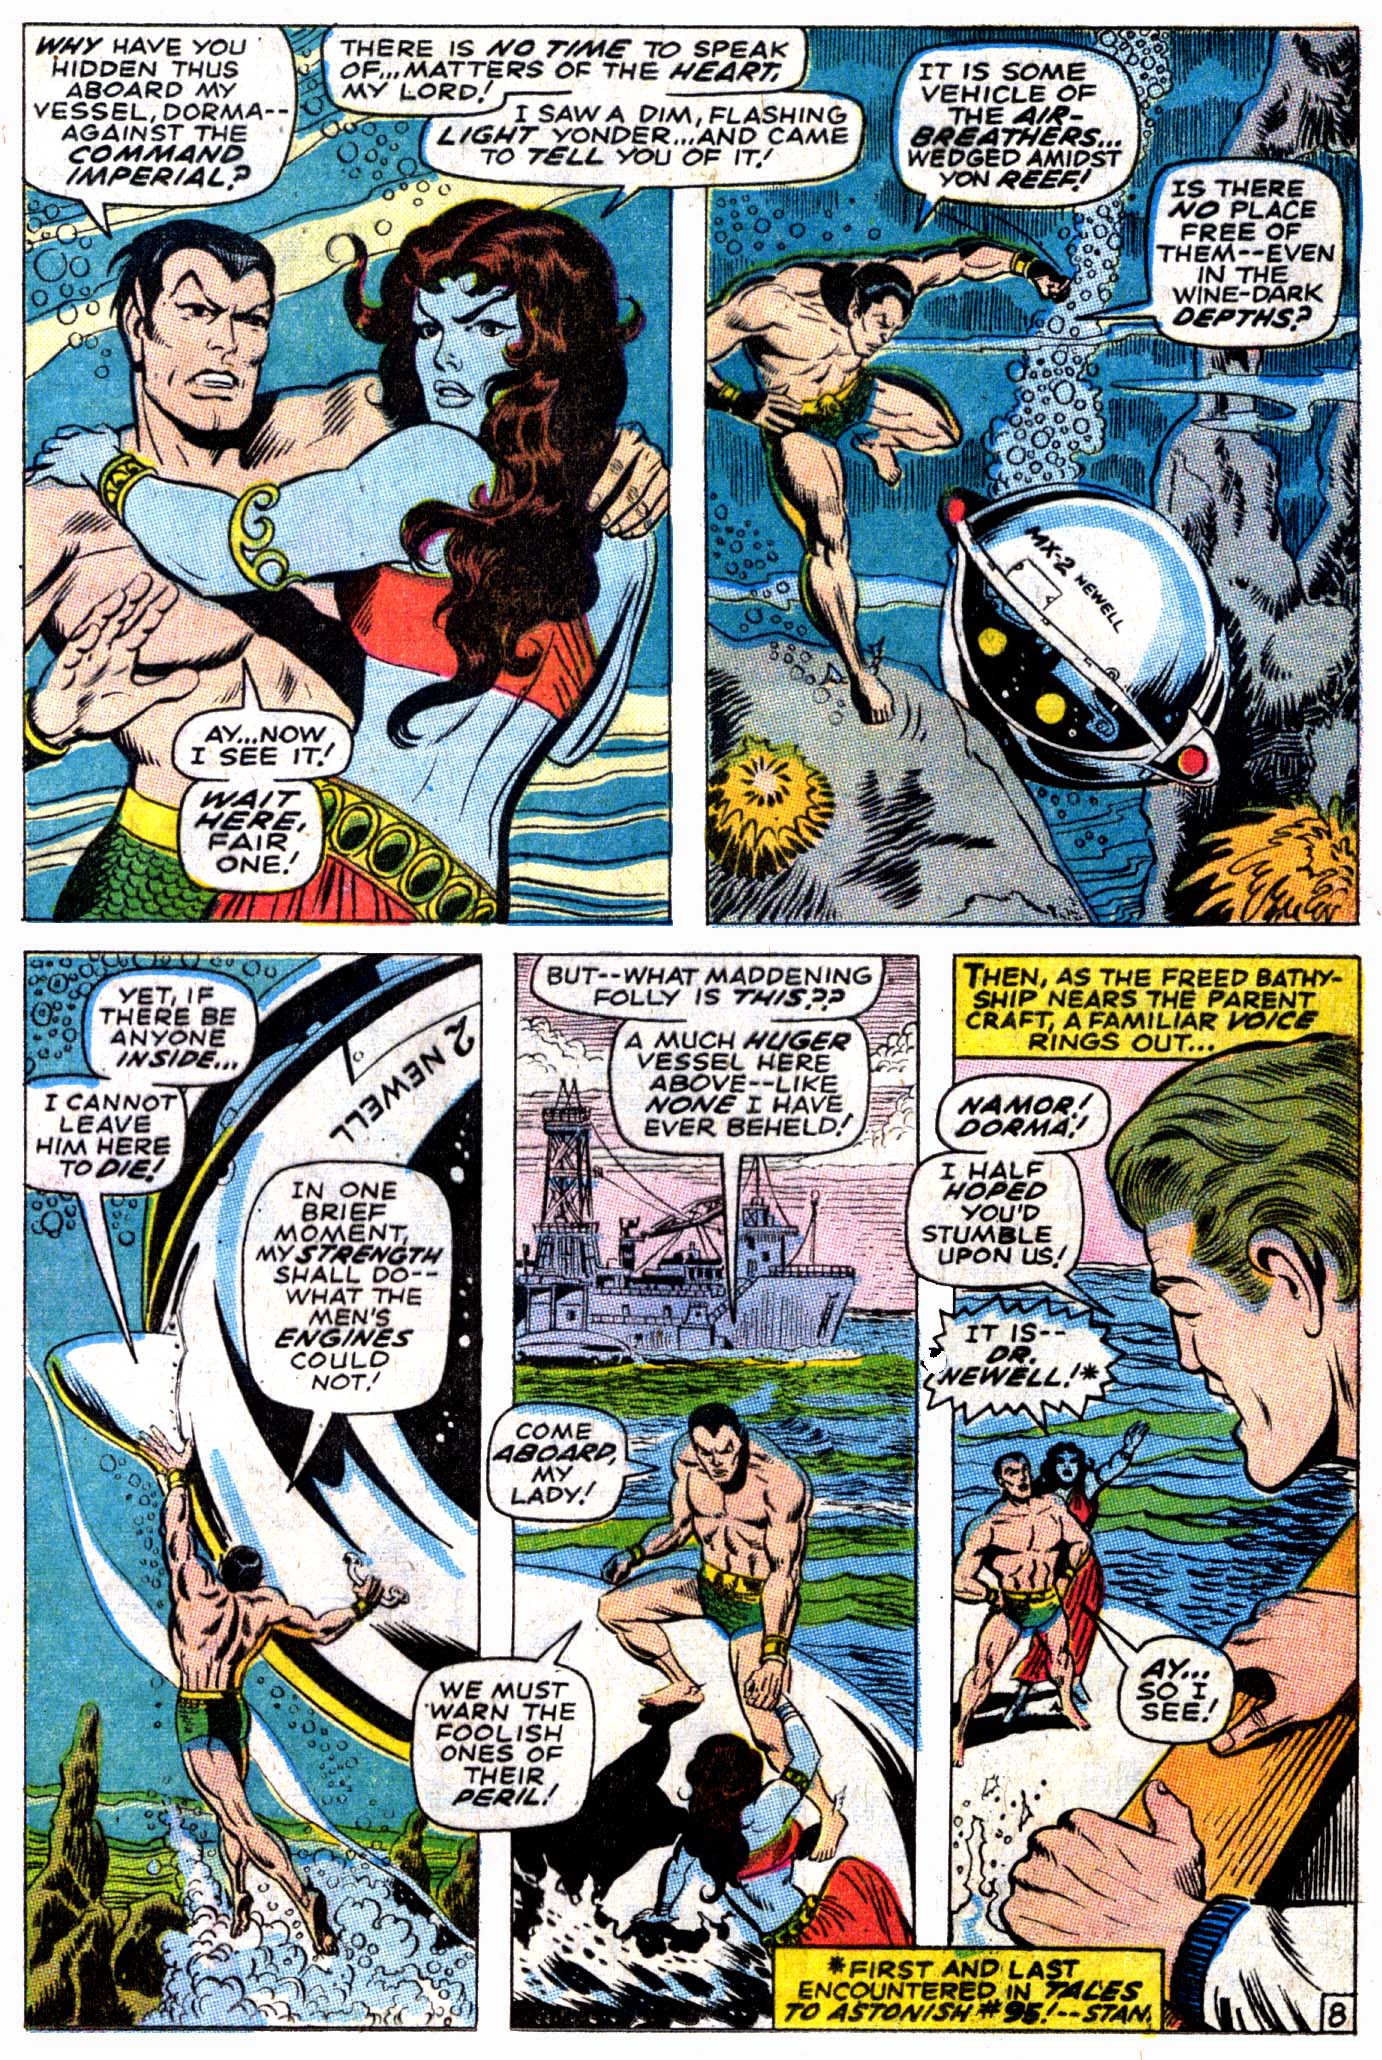 Read online The Sub-Mariner comic -  Issue #16 - 9